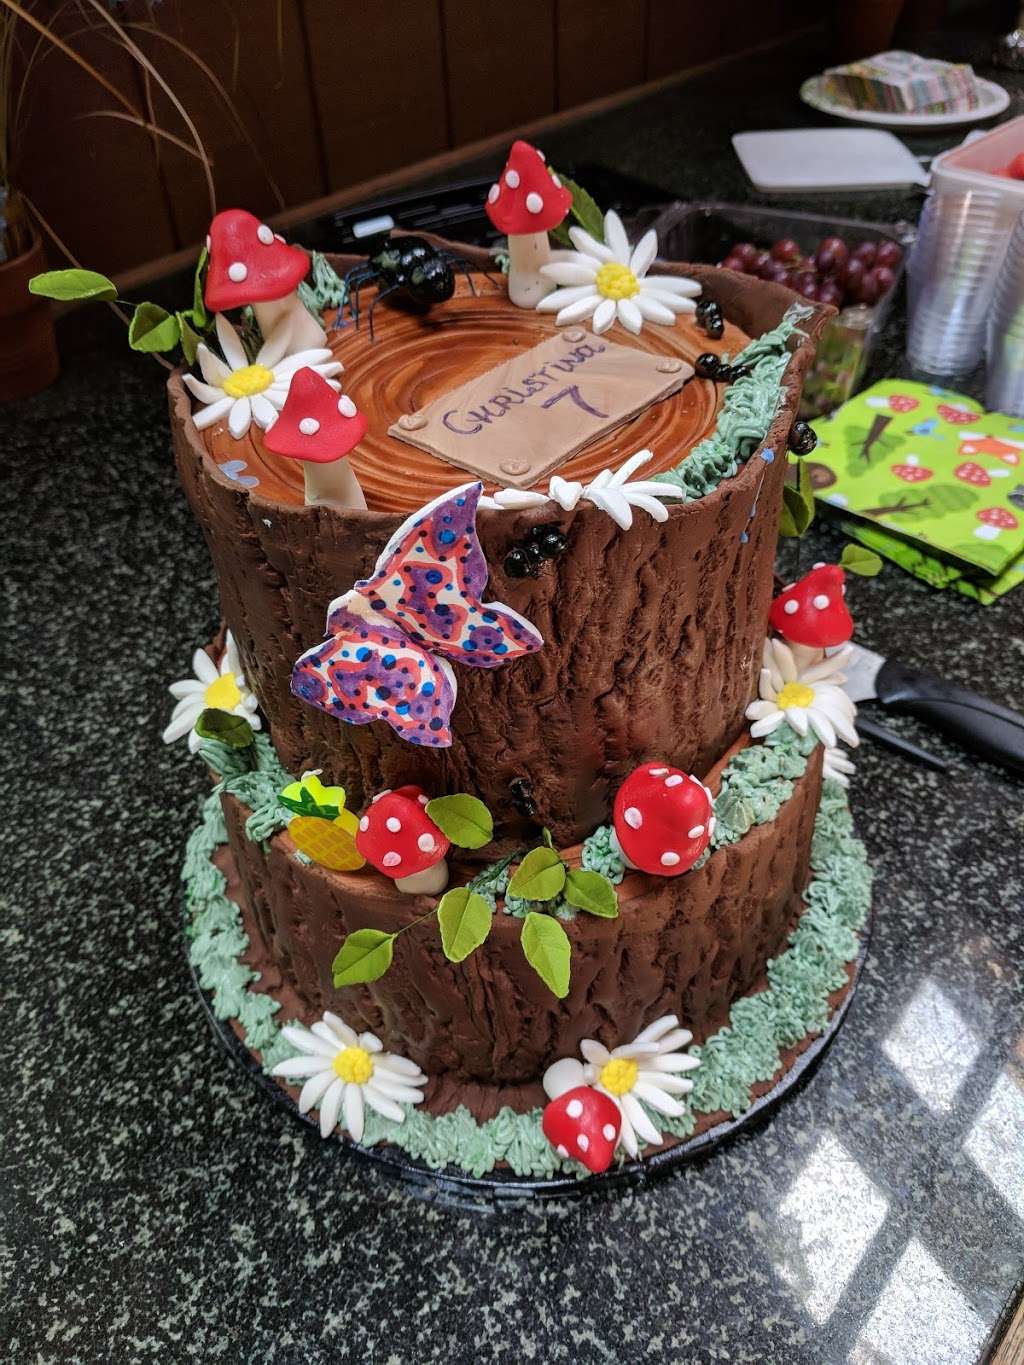 Smart Cake Bakery - Chicagoland Cakes for Any Occasion | 1003 Waukegan Rd, Northbrook, IL 60062 | Phone: (312) 852-1923